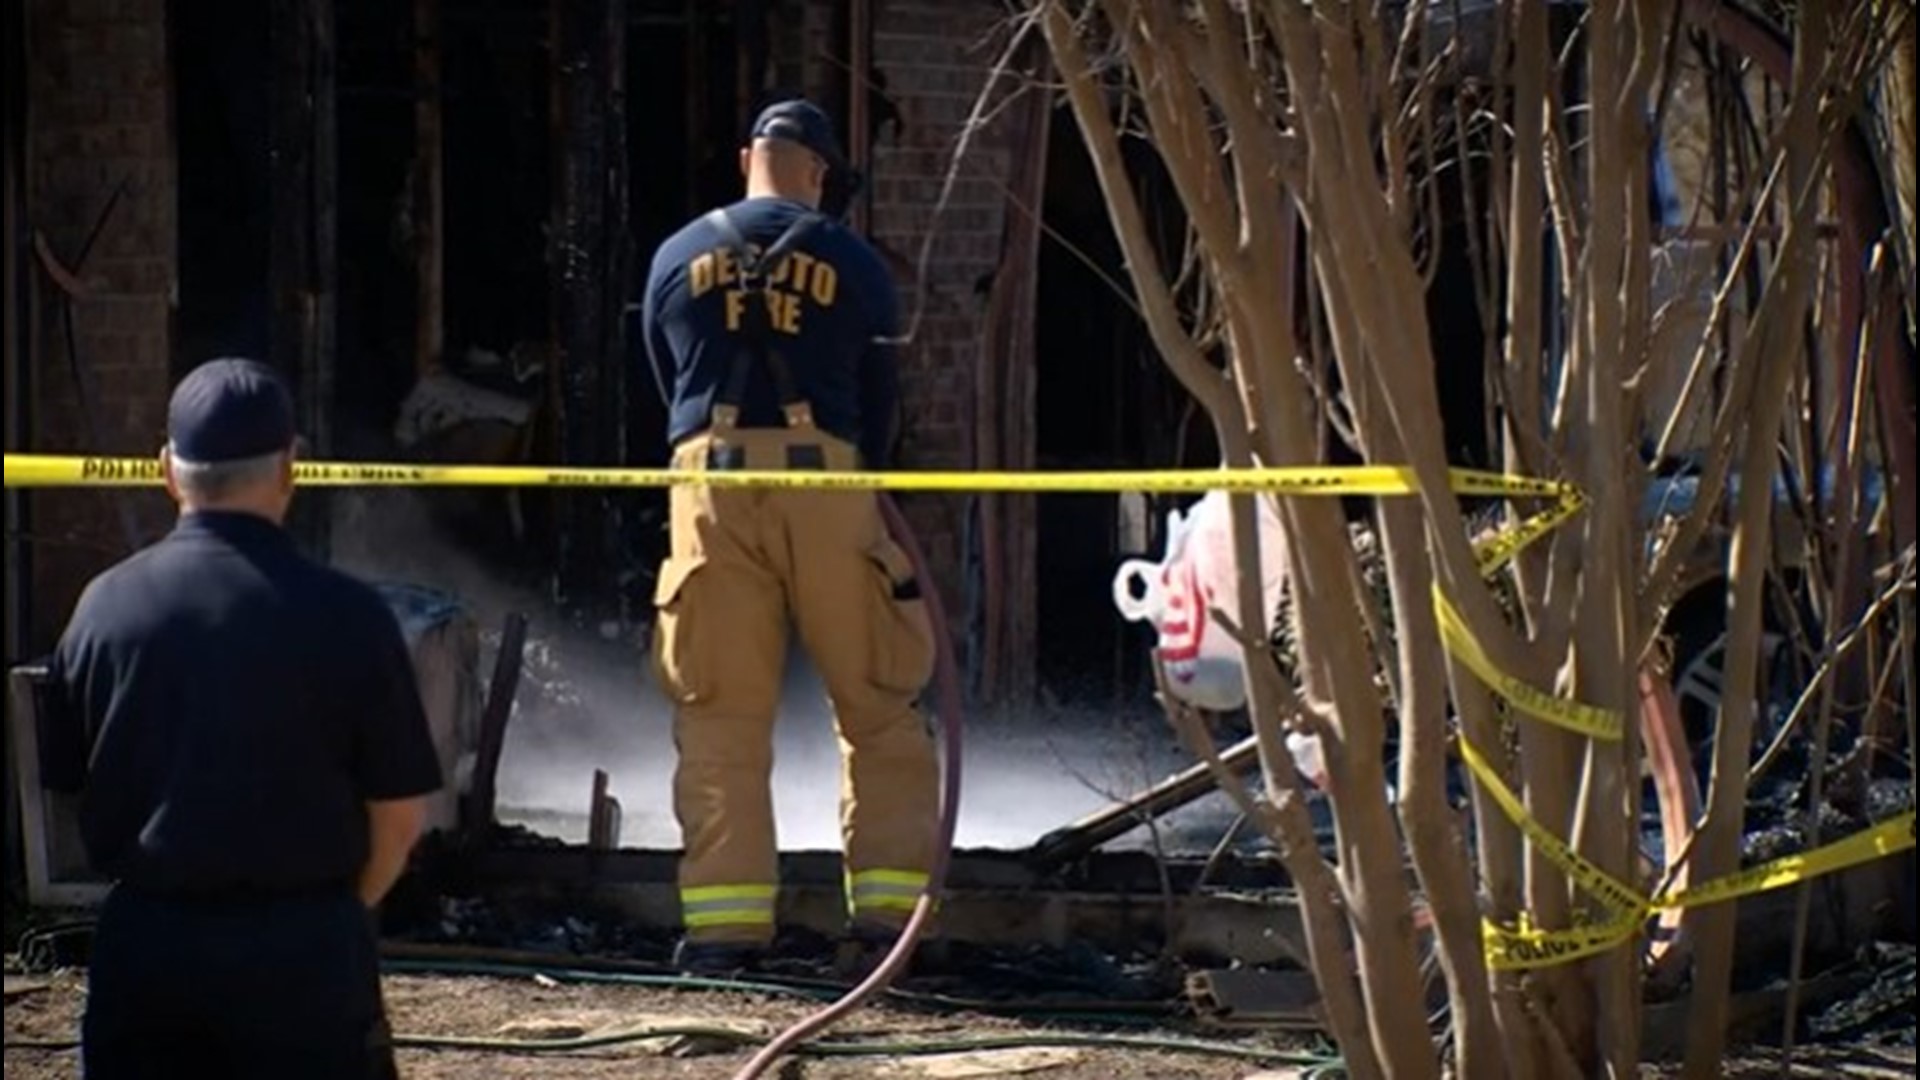 Authorities said around 4:30 a.m. Tuesday, Feb. 23 a person called 911 to report the house fire. Two children, ages 1 and 2 years old, were killed.